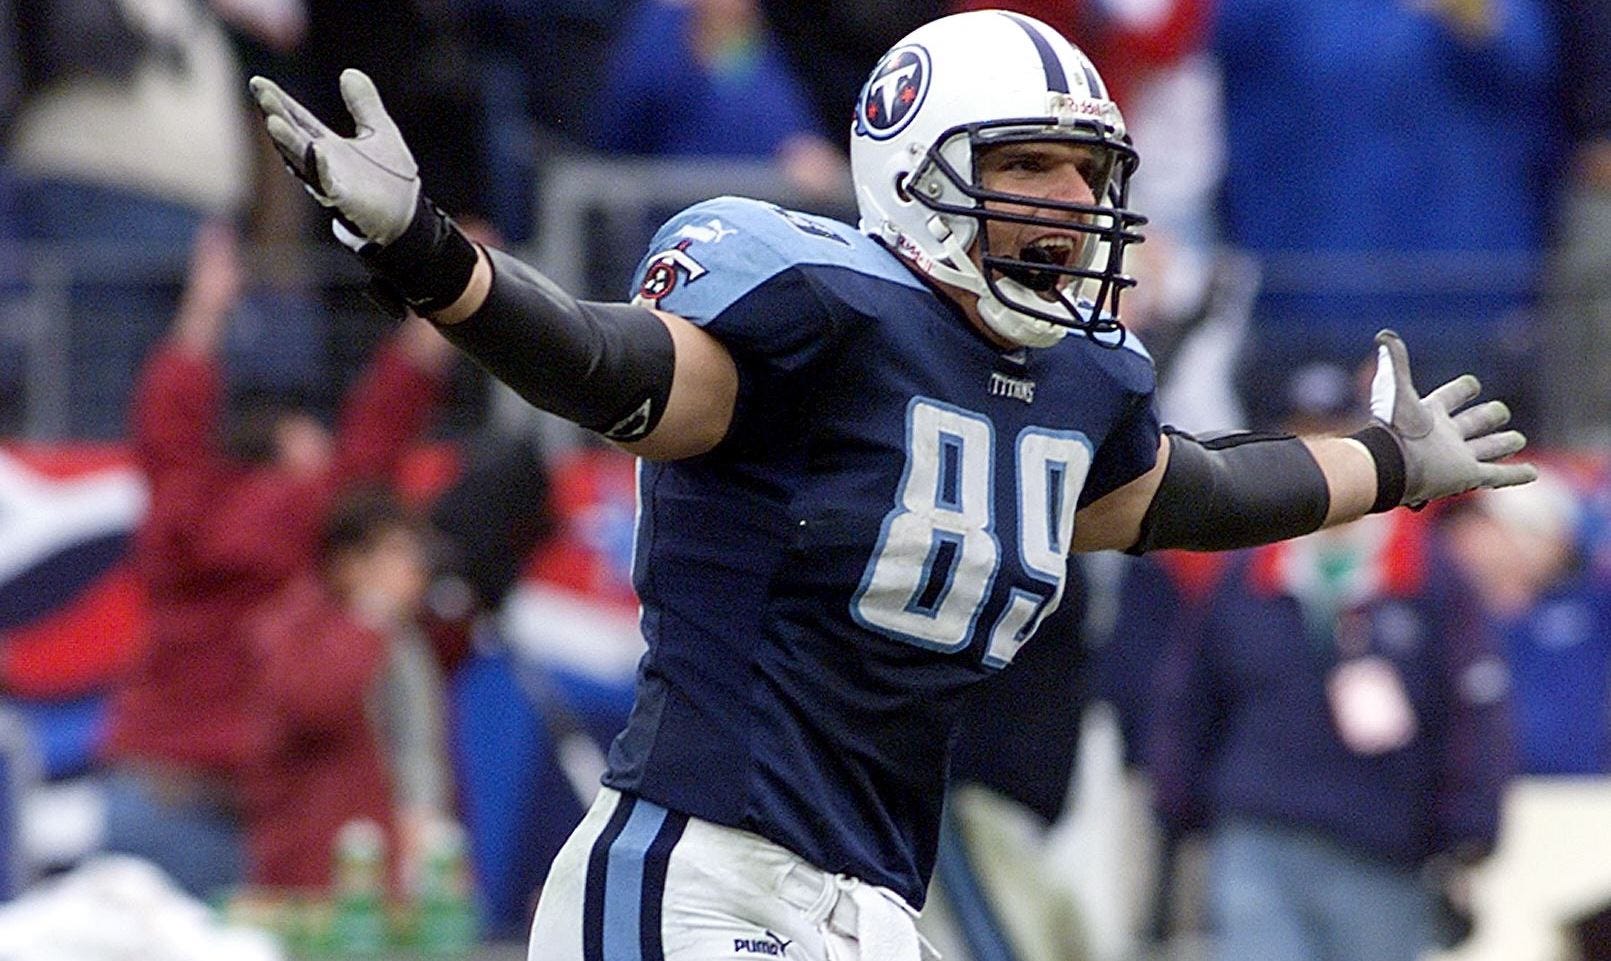 Frank Wycheck and an inside look at the 'Music City Miracle'